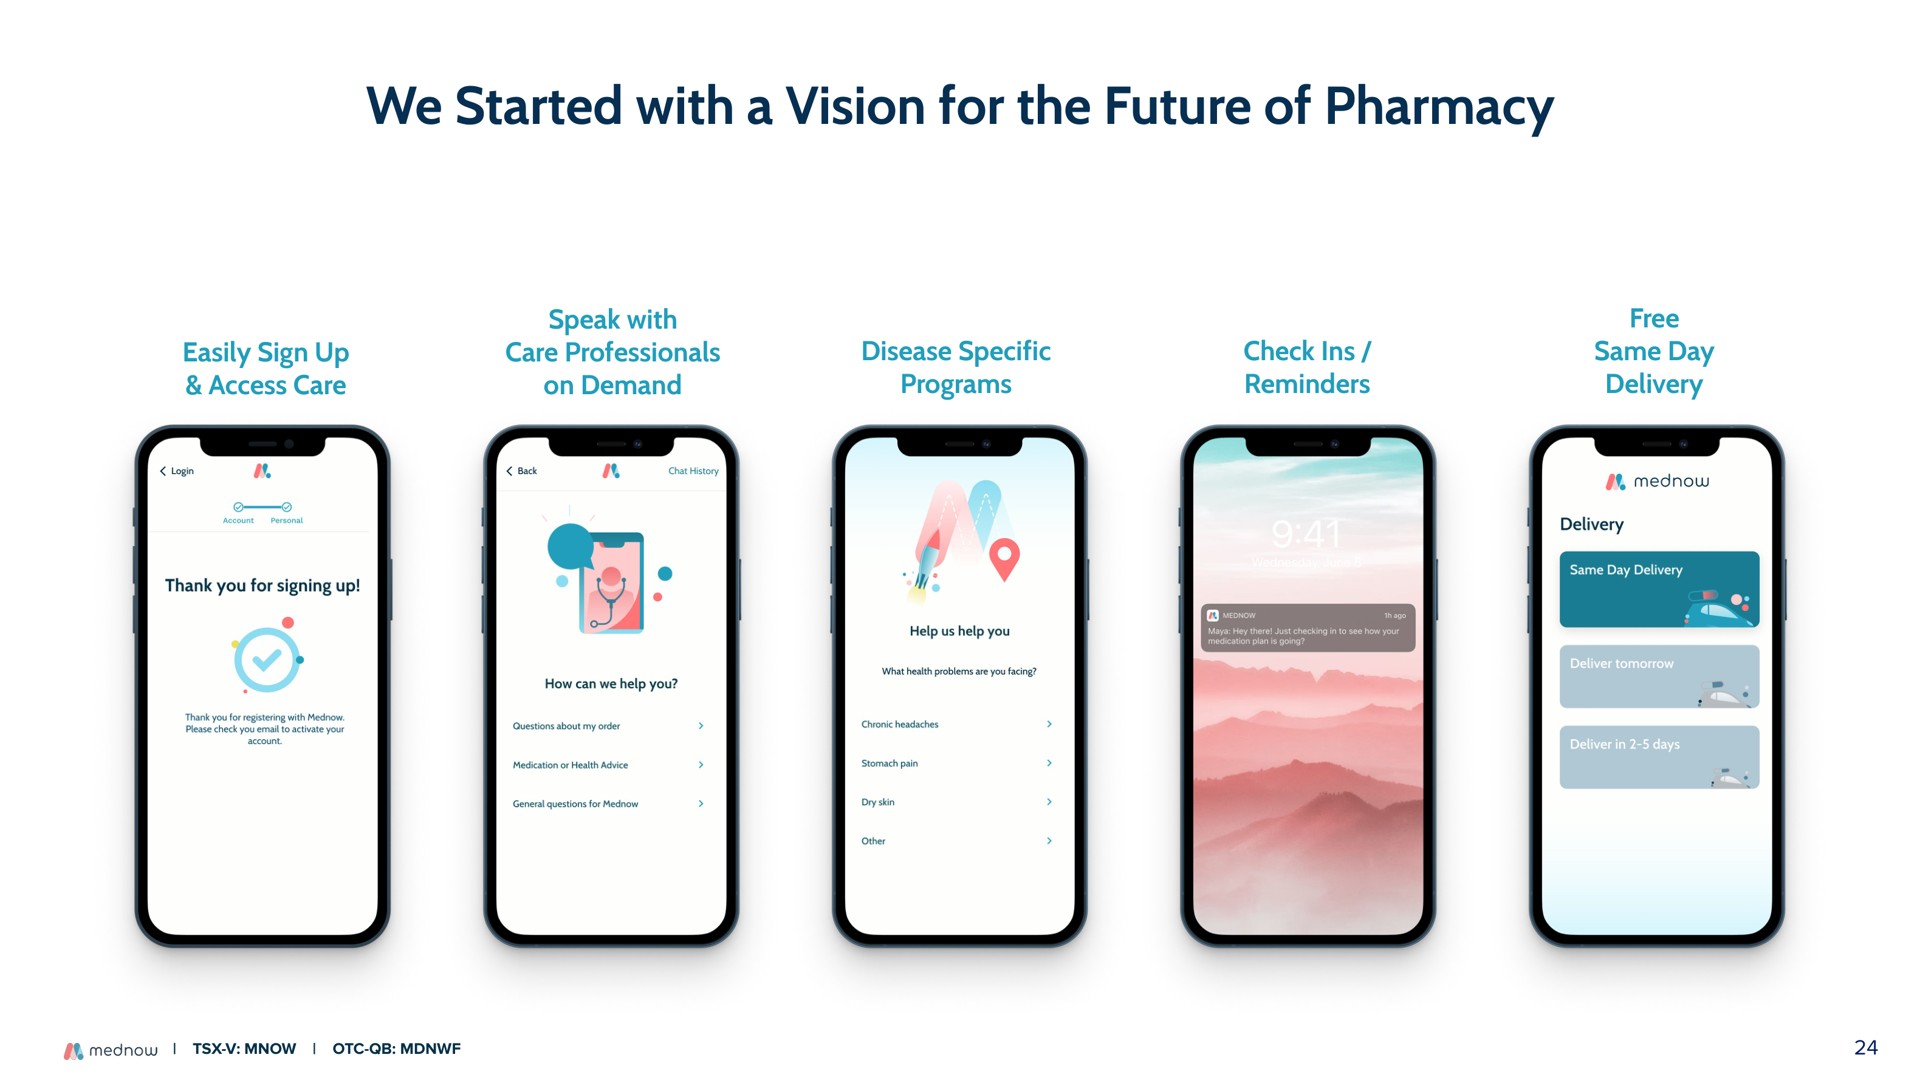 we started with a vision for the future of pharmacy easily sign up access care speak with care professionals on demand disease specific programs check ins reminders free same day delivery | Mednow